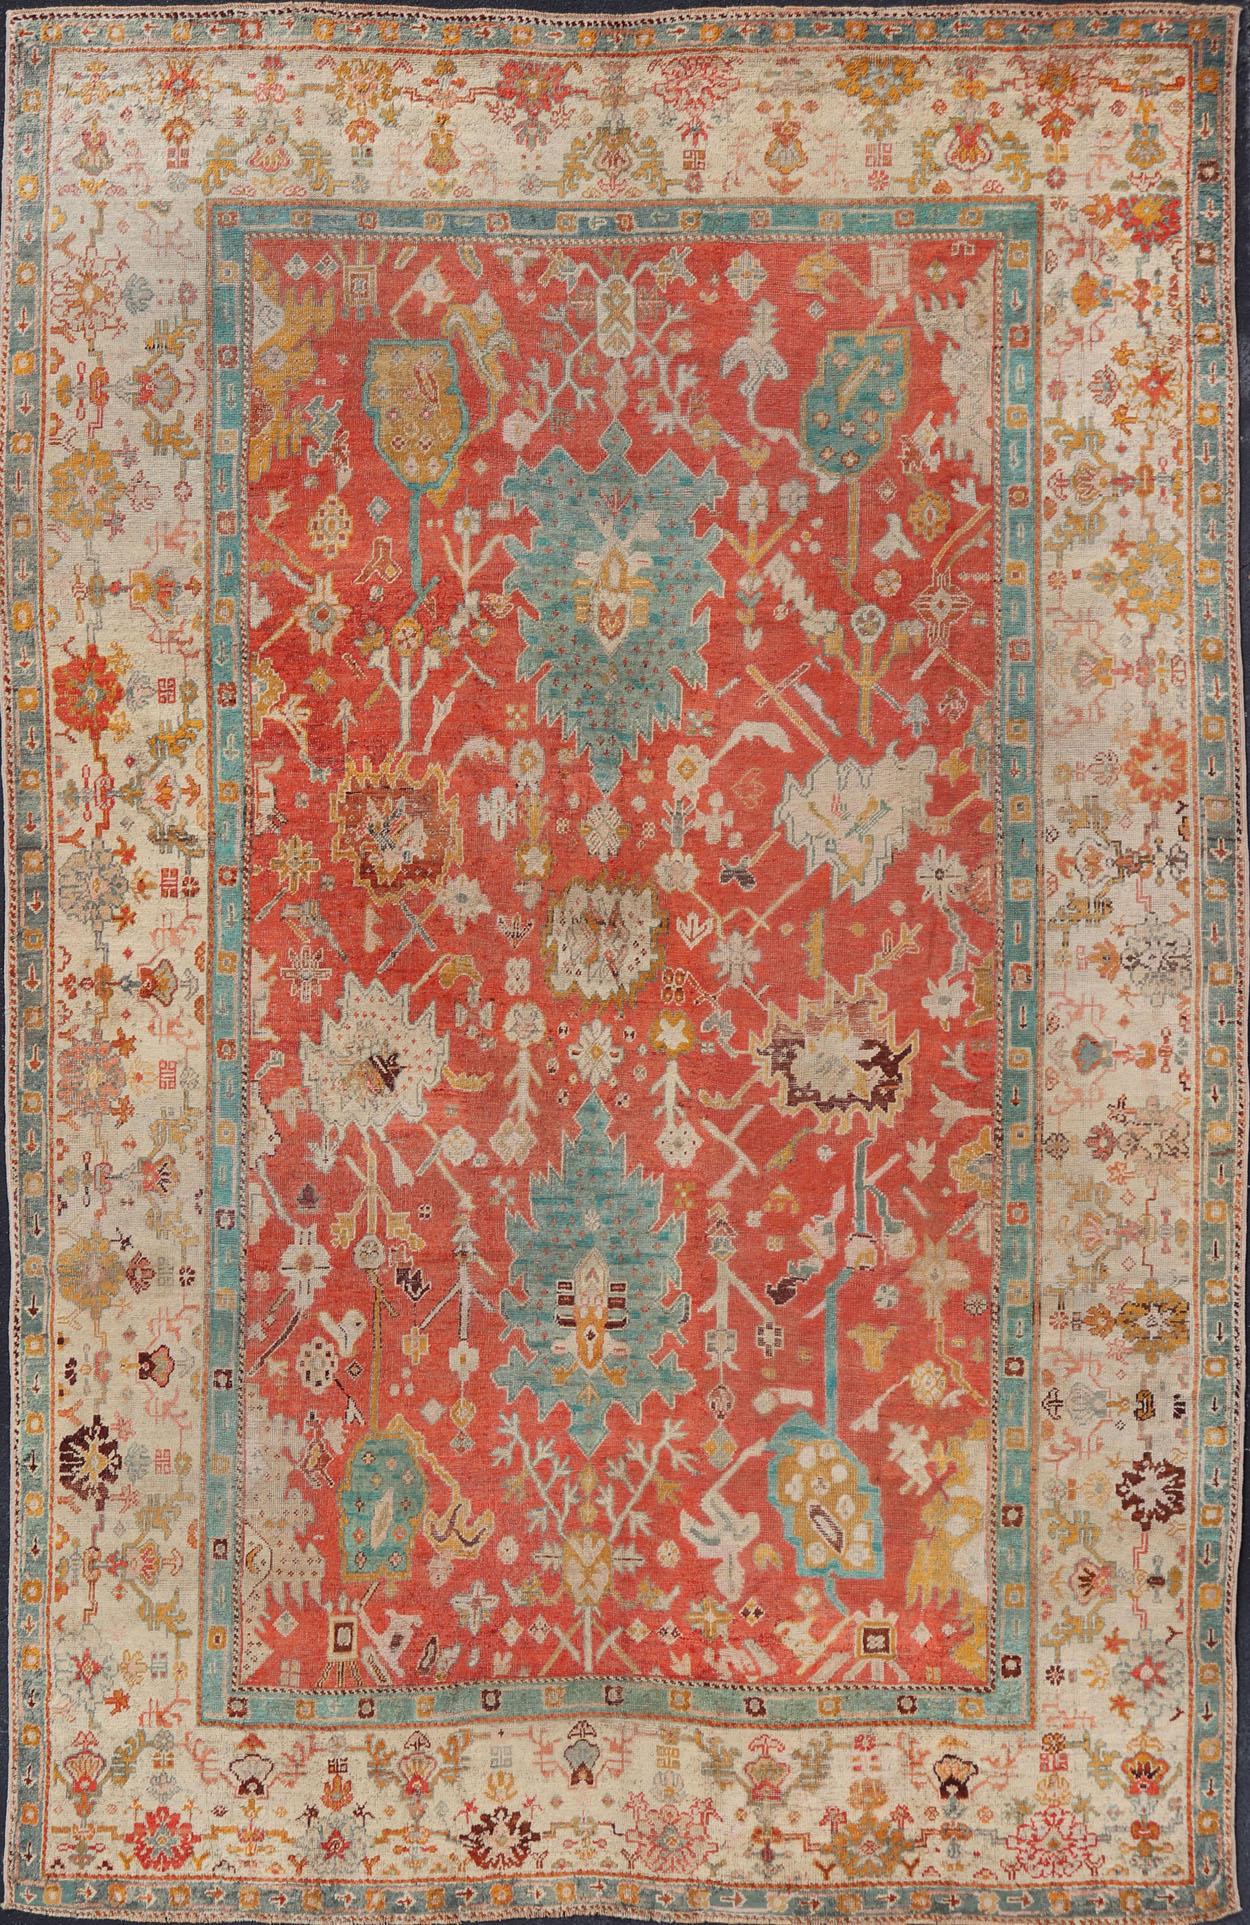 Antique Turkish Oushak In Tribal Motifs in Soft Coral, Blue, Marigold, and Cream For Sale